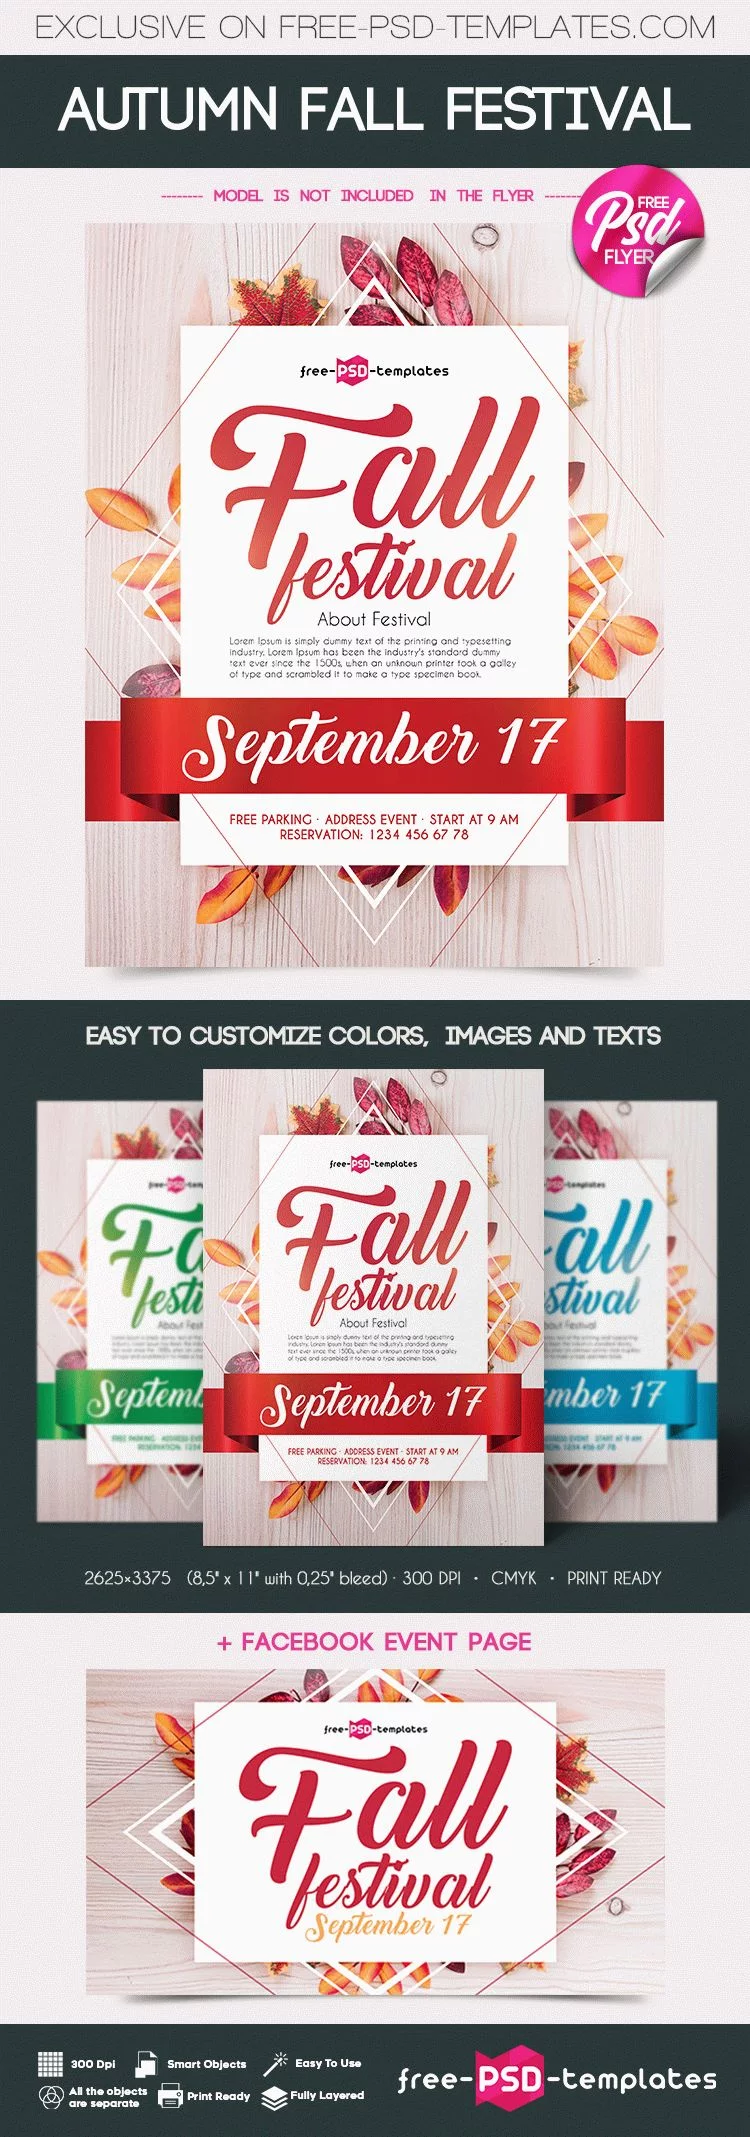 Free Autumn Fall Festival Flyer in PSD